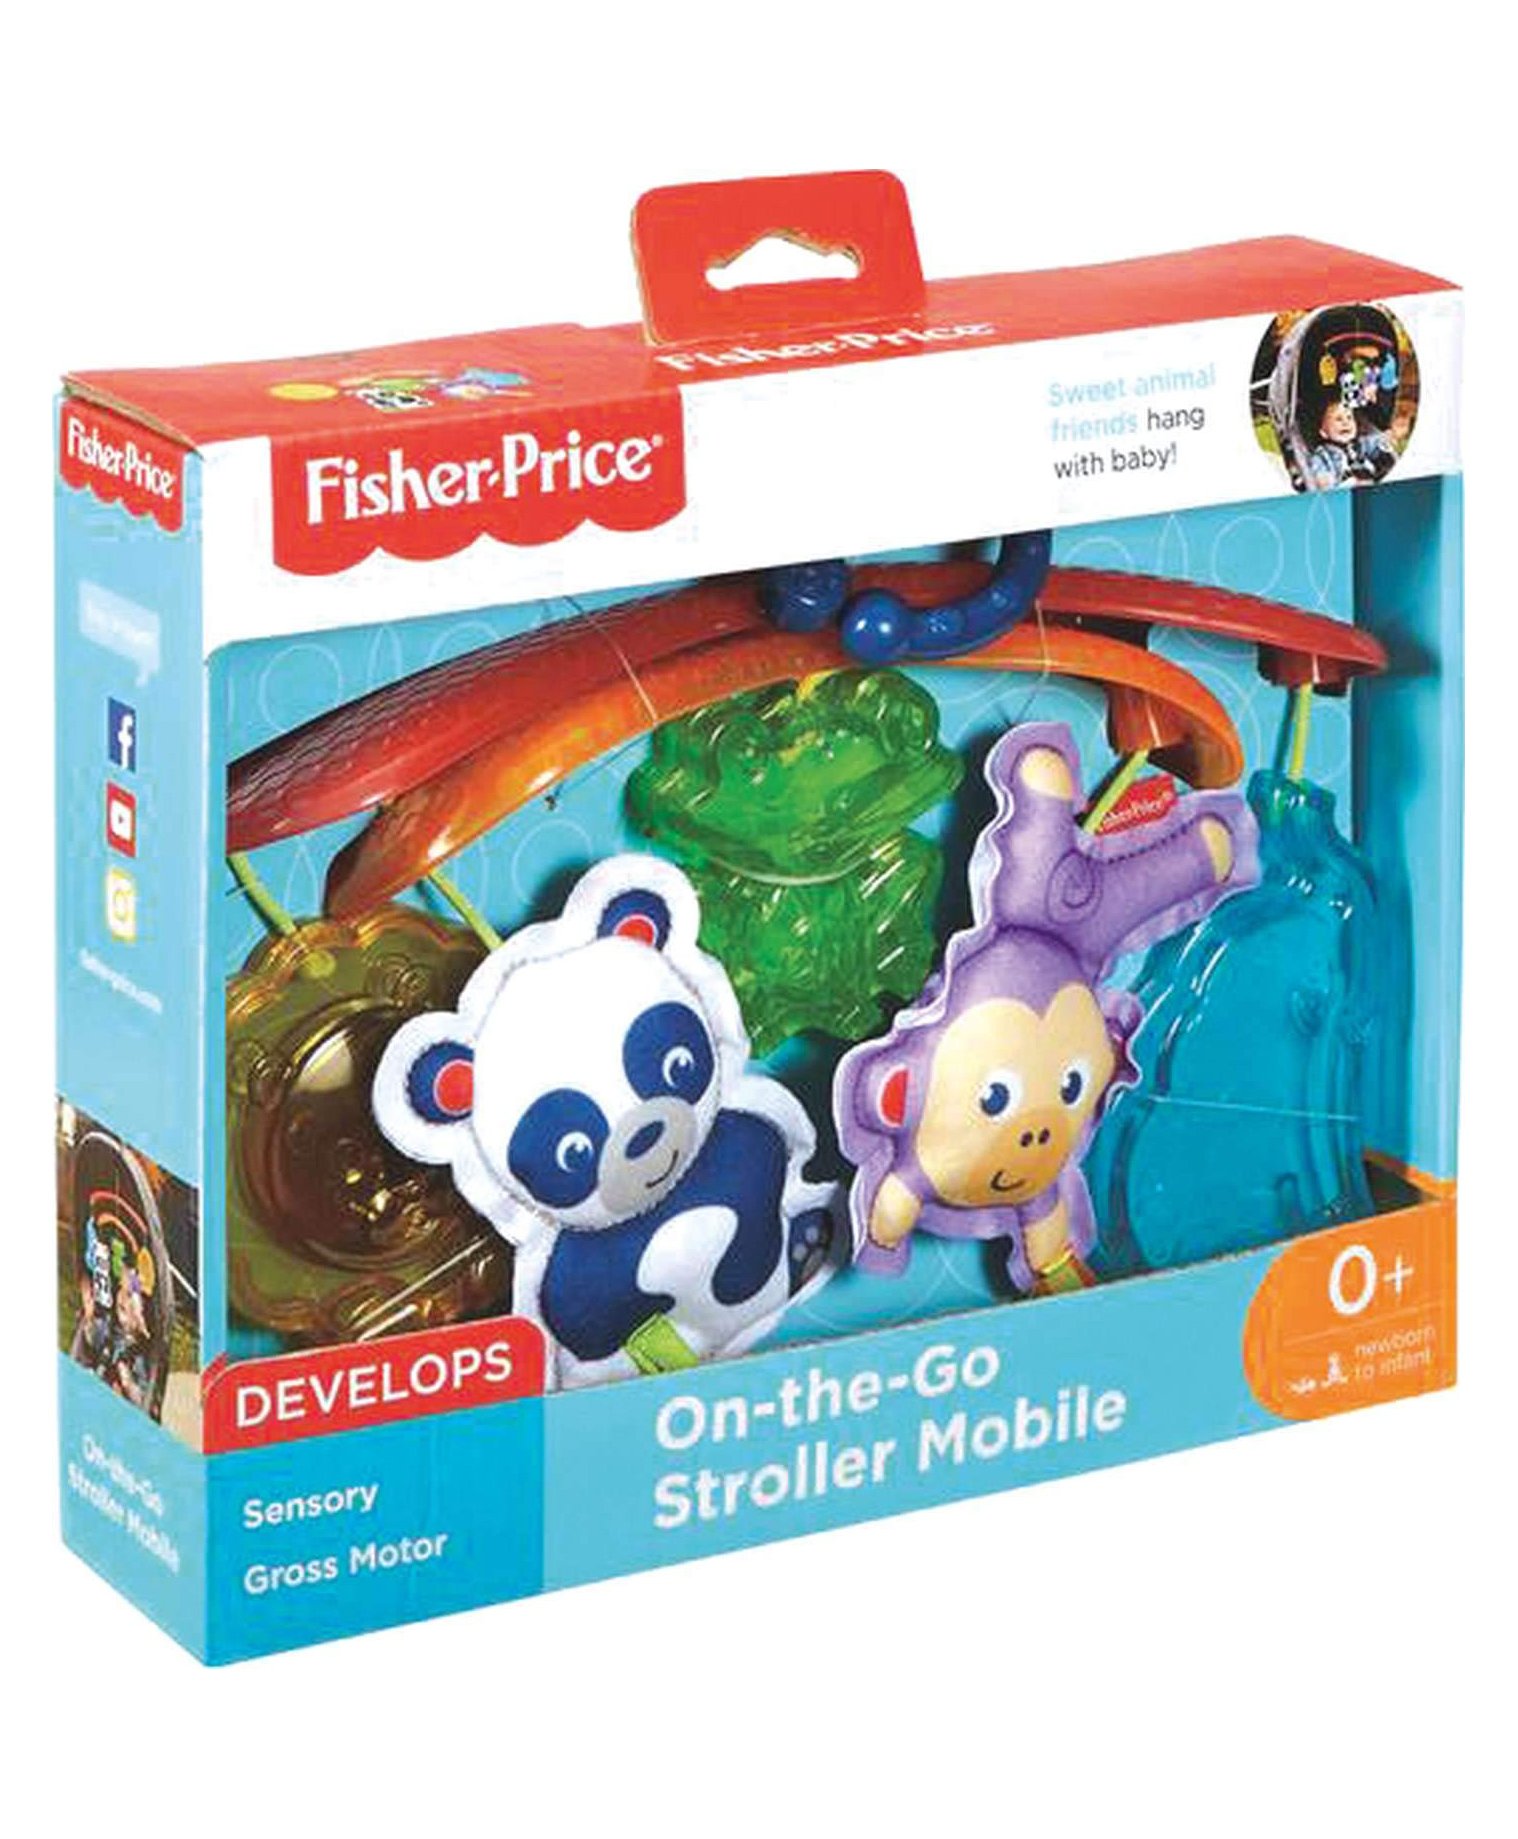 Fisher Price On the go Stroller Mobile Blue Online in